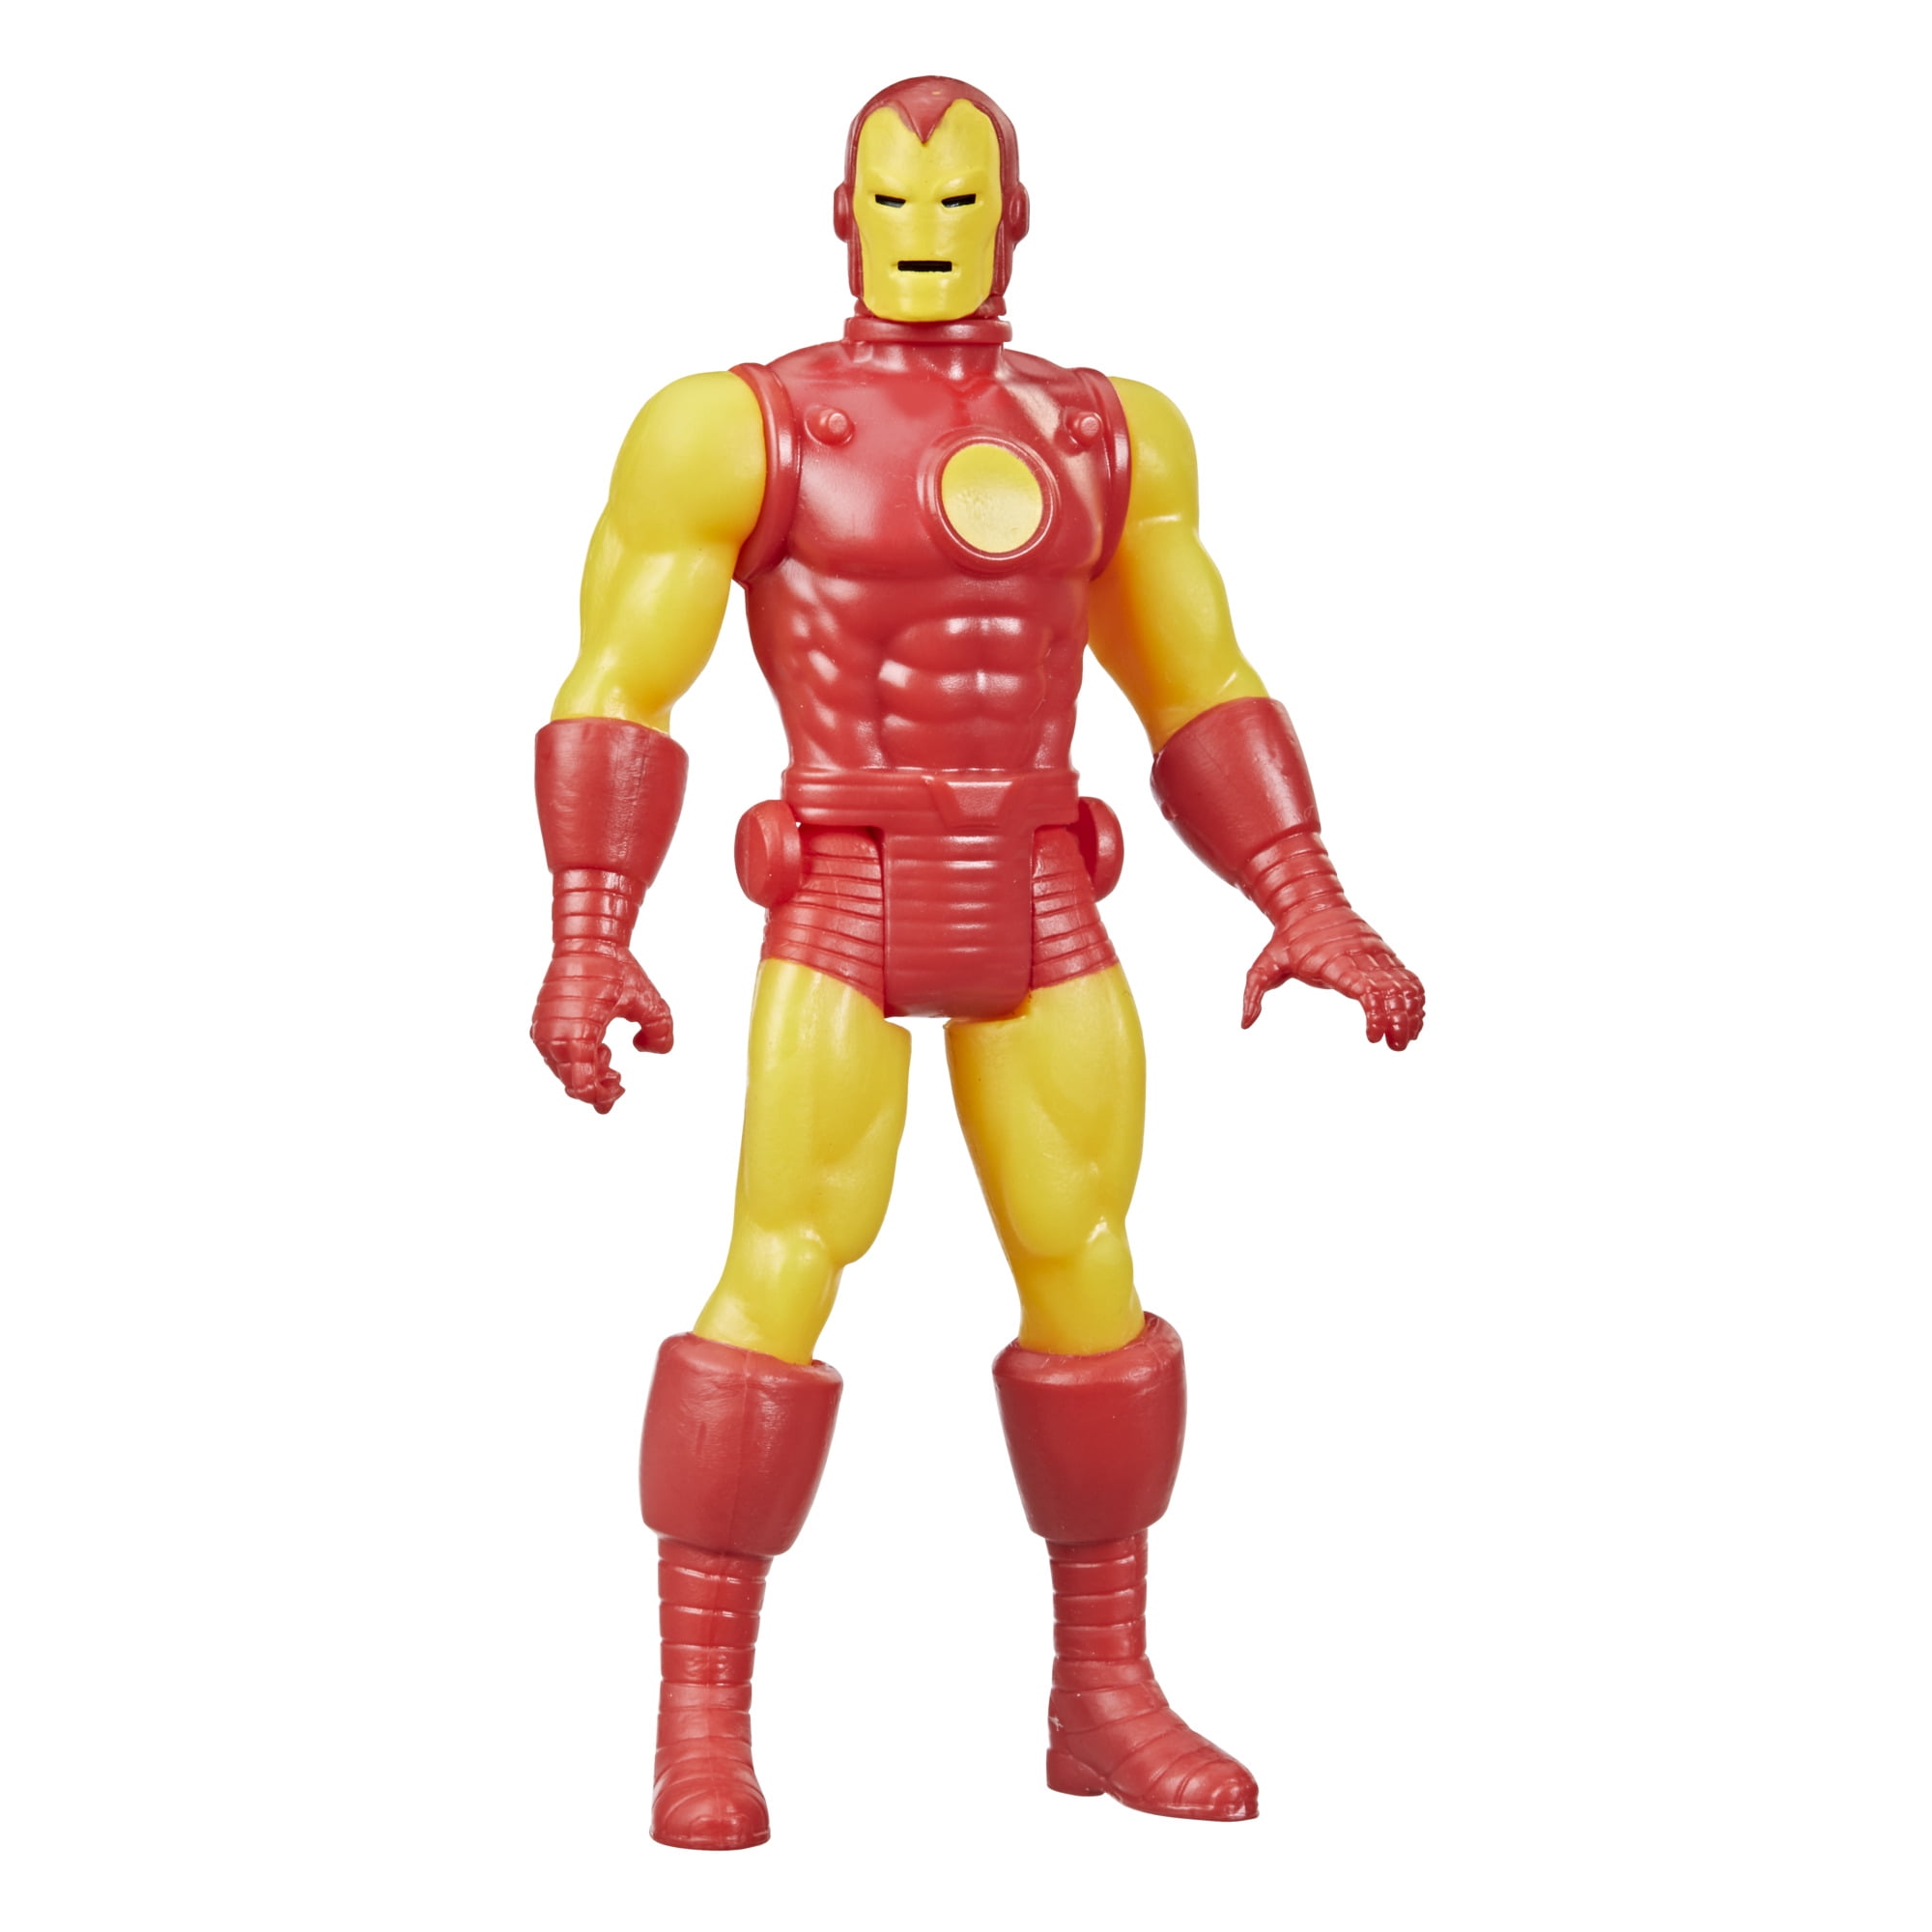 Collectables & Gifts WOW Official Marvel Toys PODS Avengers Collection Superhero Light-Up Bobble-Head Figure Iron Man Metallic Limited Edition